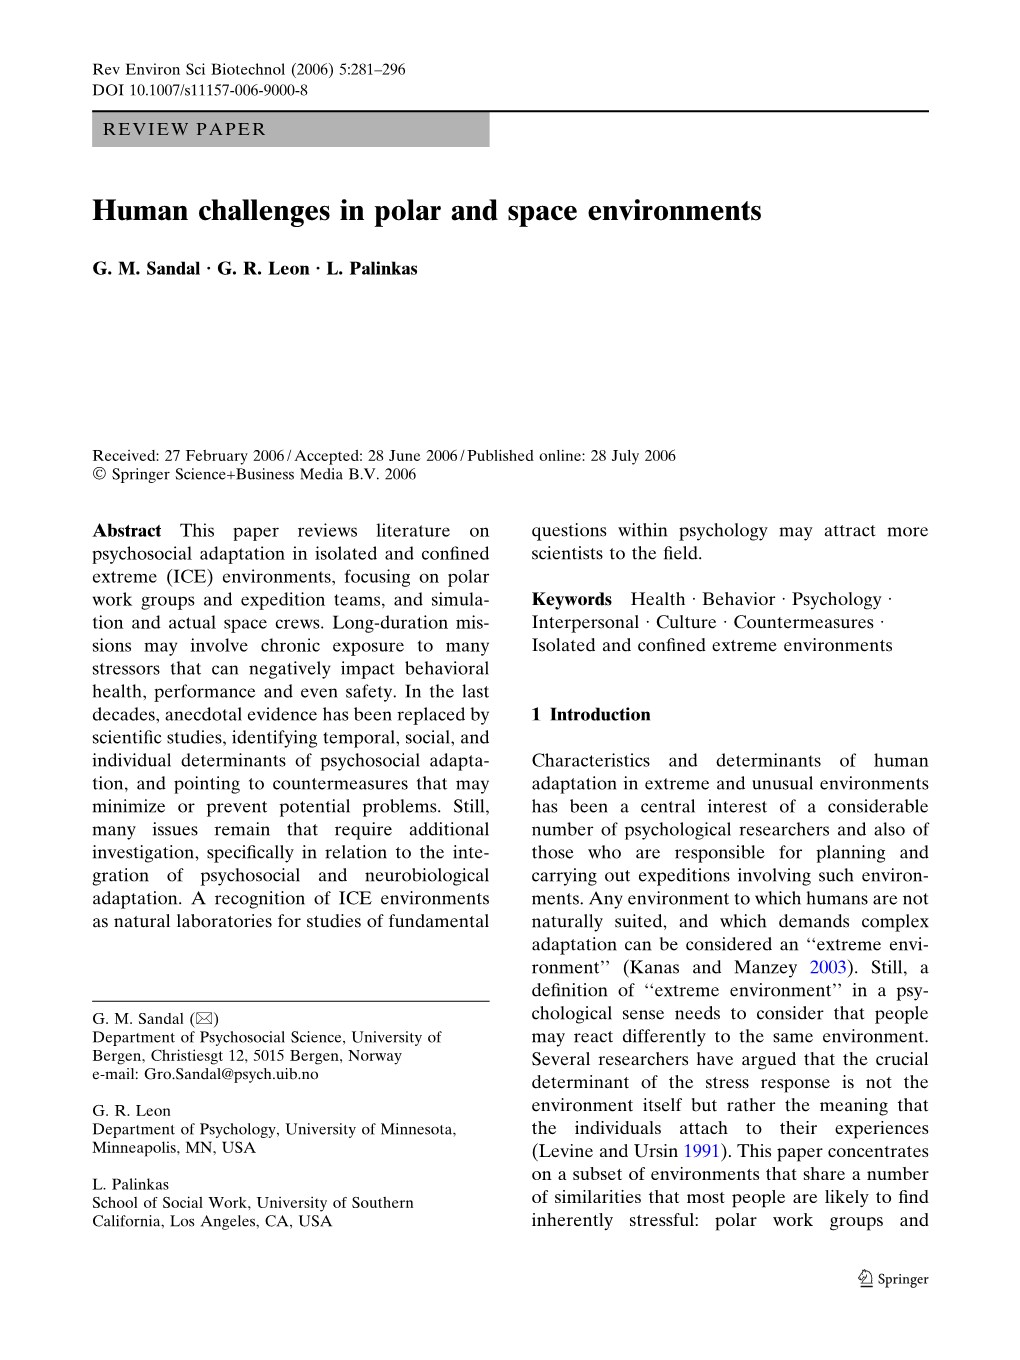 Human Challenges in Polar and Space Environments